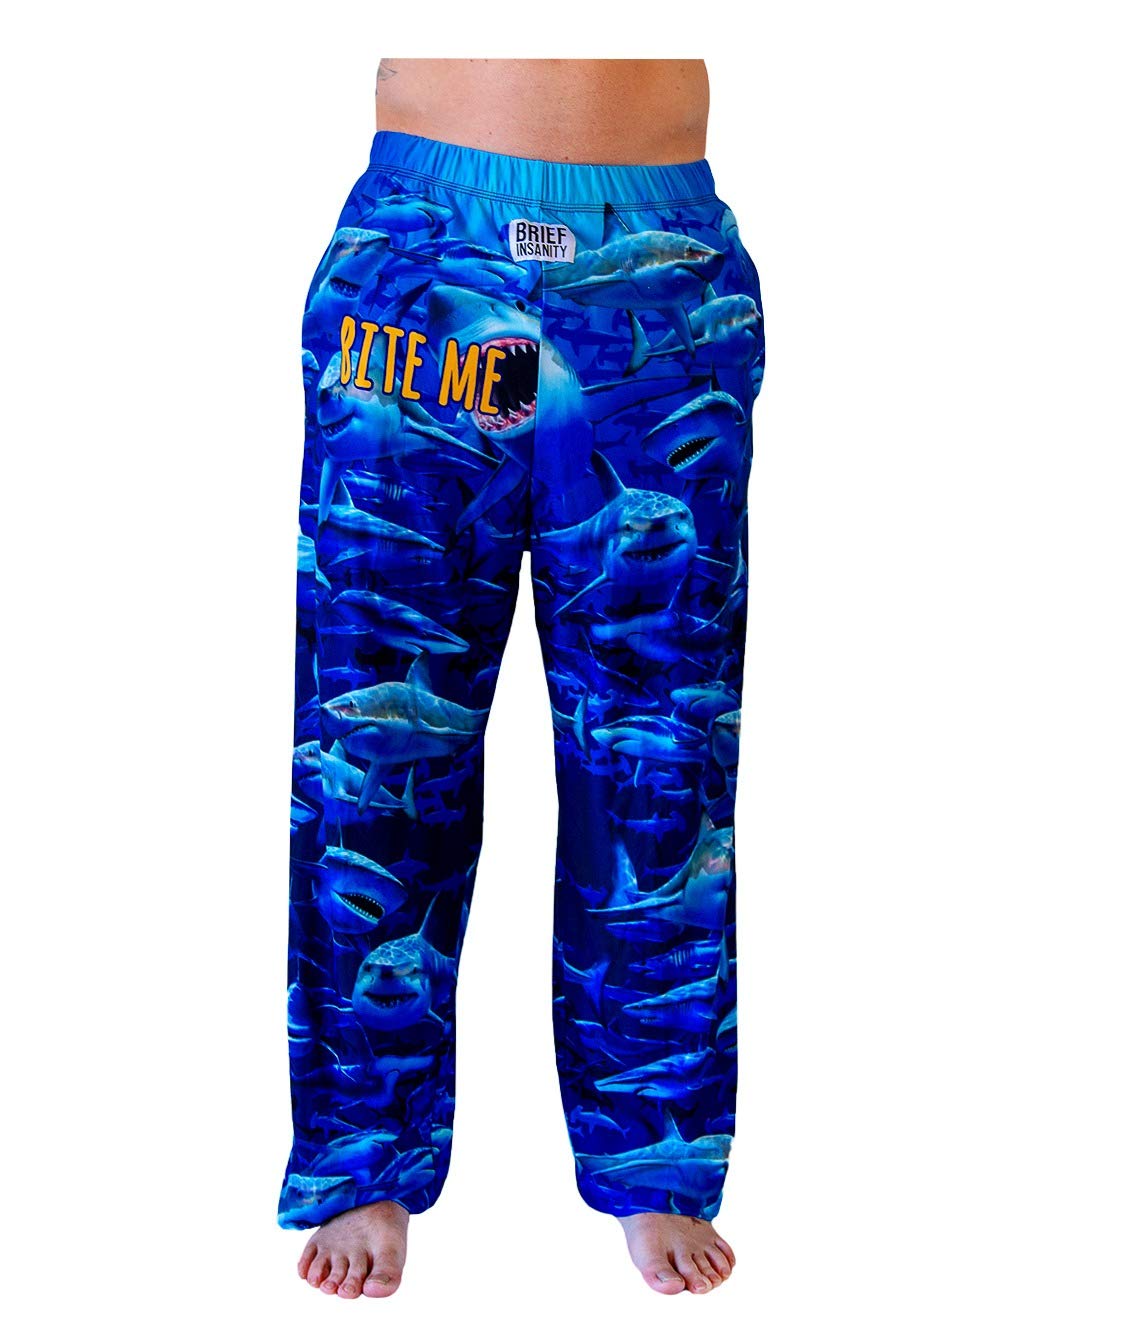 Waist down photo of model wearing Bite Me Shark pajama lounge pants front view (white background)